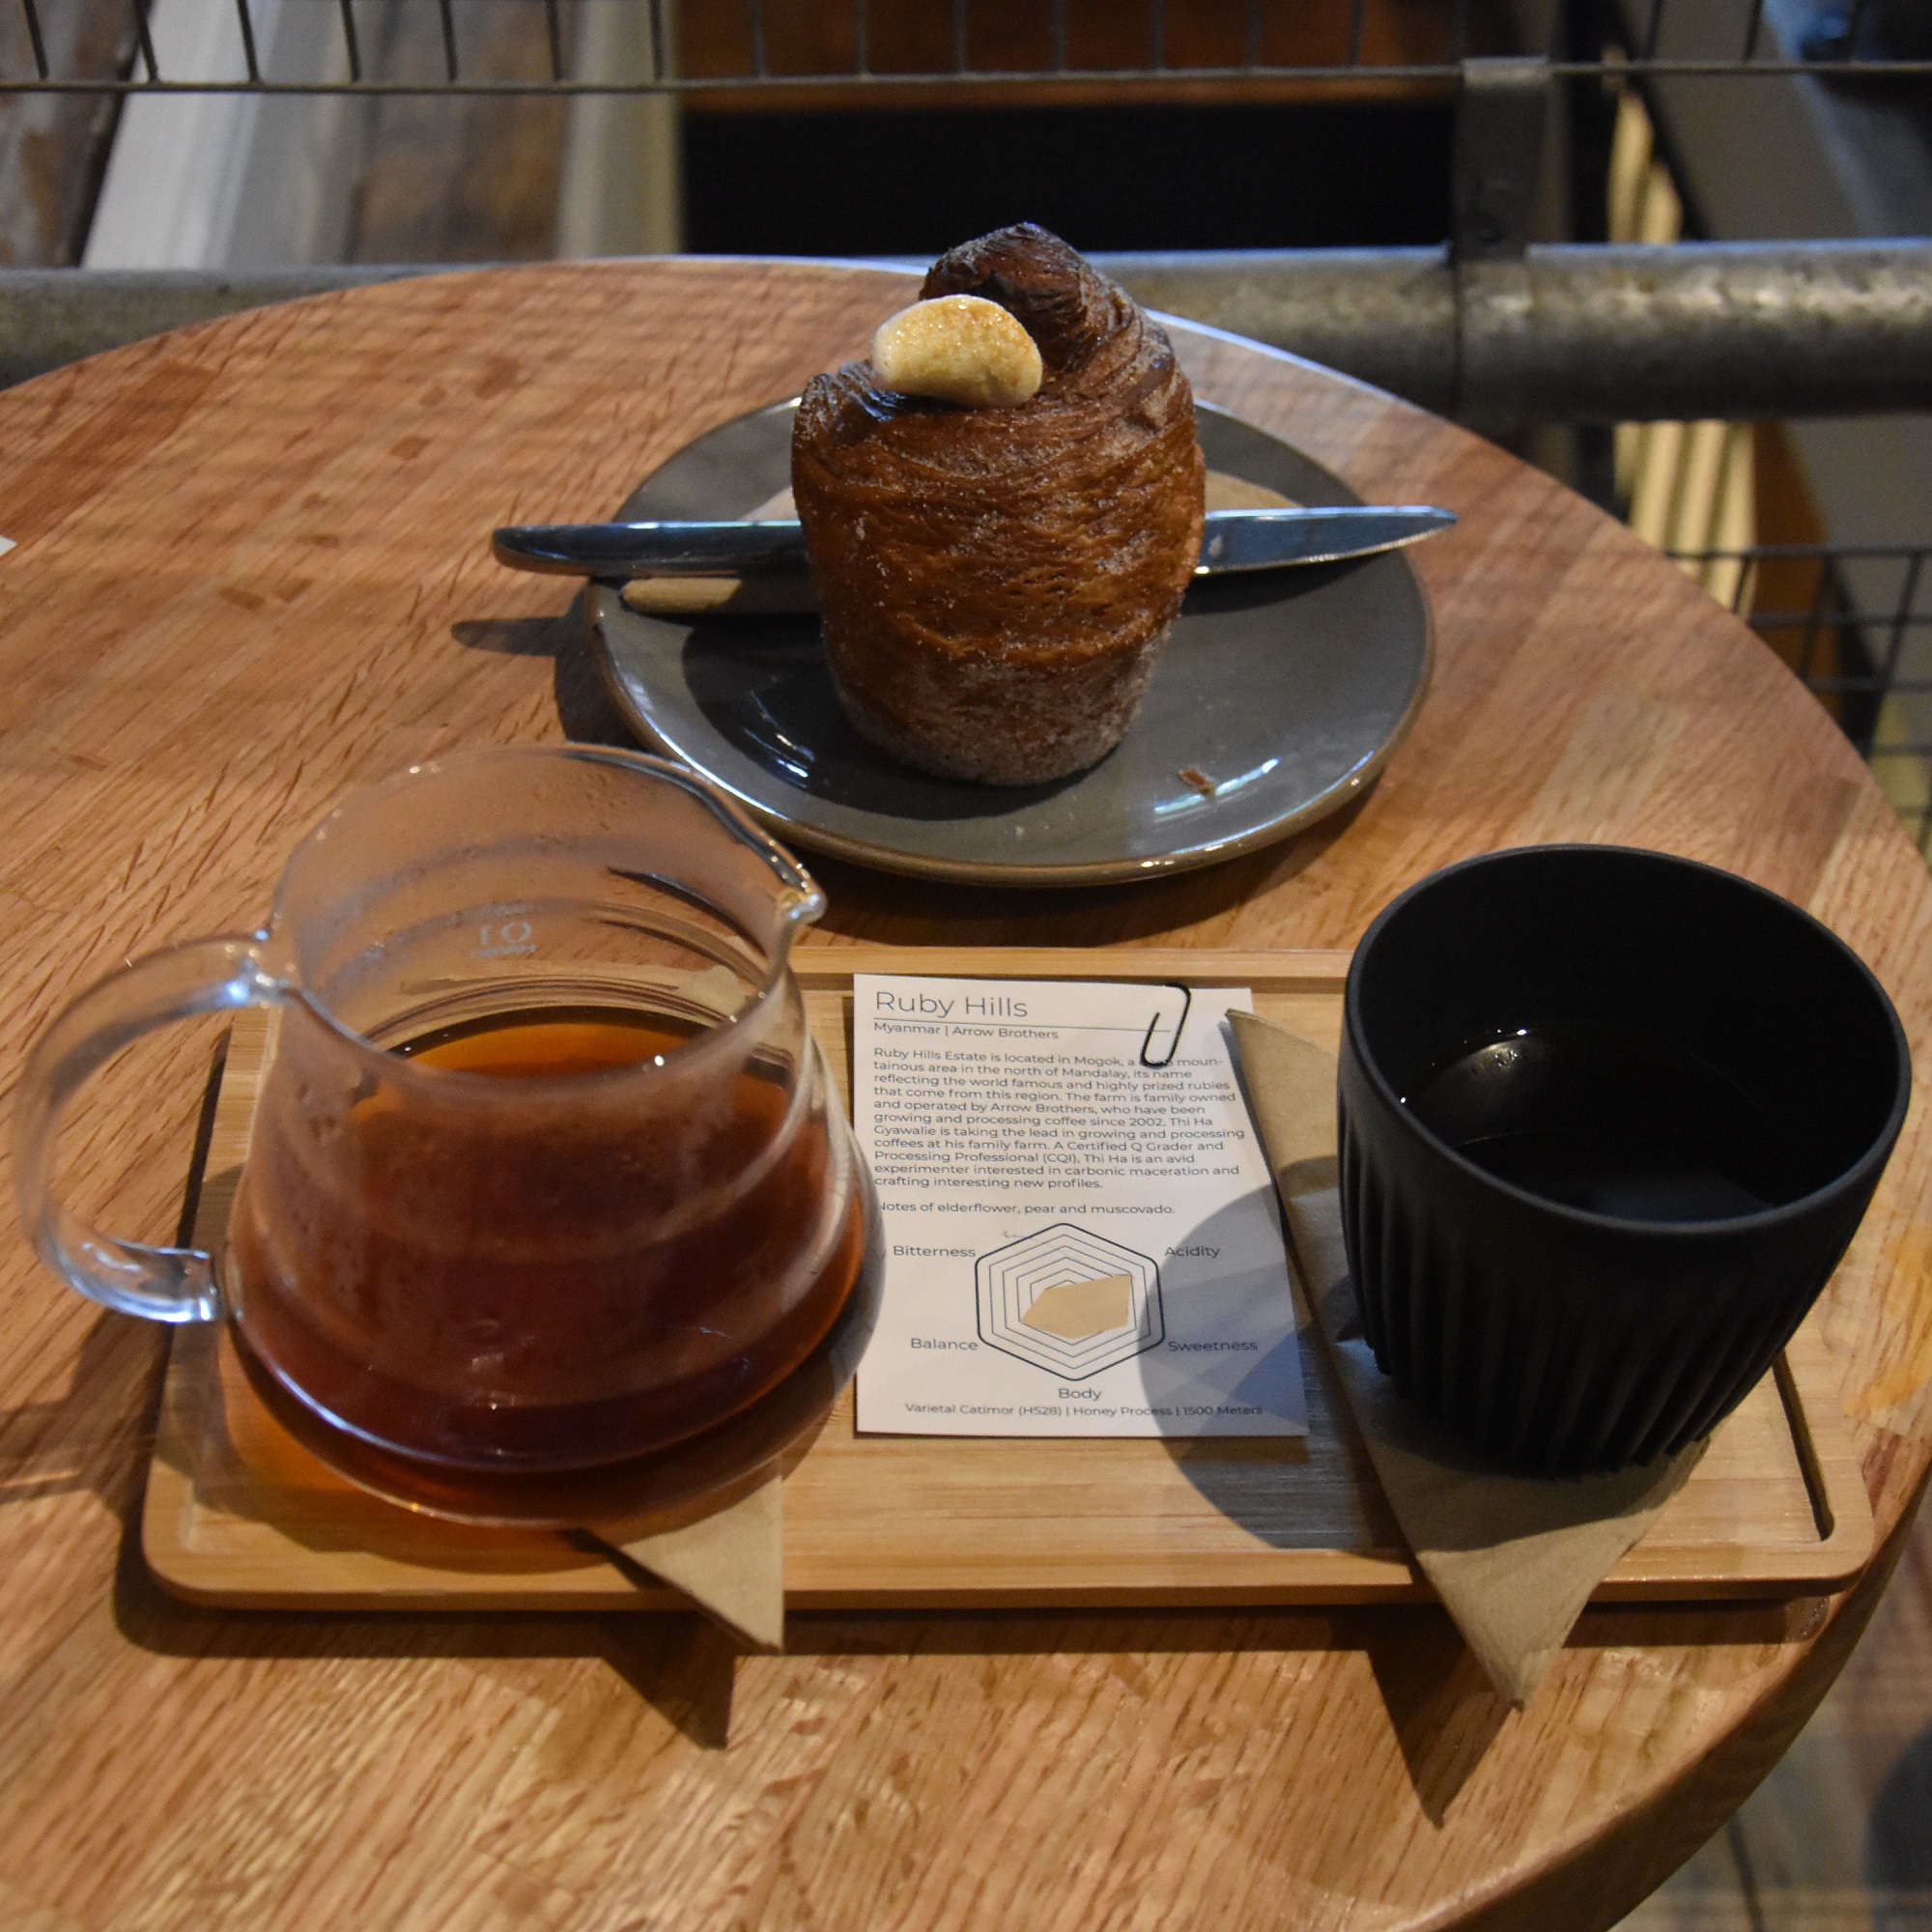 My coffee, the Ruby Hills, a honey-processed coffee grown by the Arrow Brothers in Myanmar, imported by Indochina Coffee and prepared using the V60. Served with a HuskeeCup and information card, I also had a cruffin which is in the background.